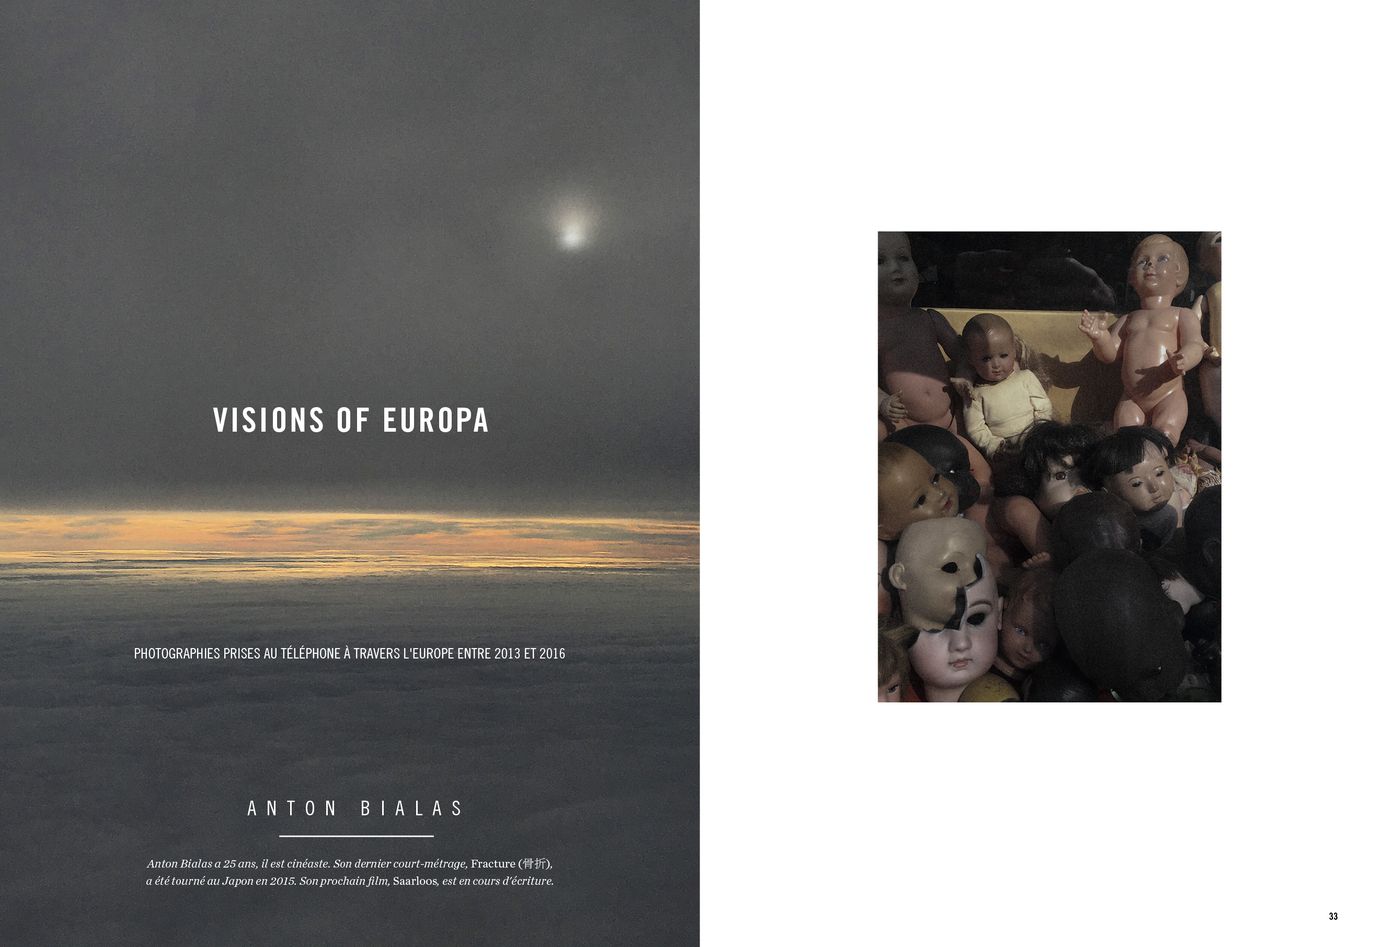 Possession Immédiate Volume 5 - Photographies d’Anton Bialas, Visions of Europa